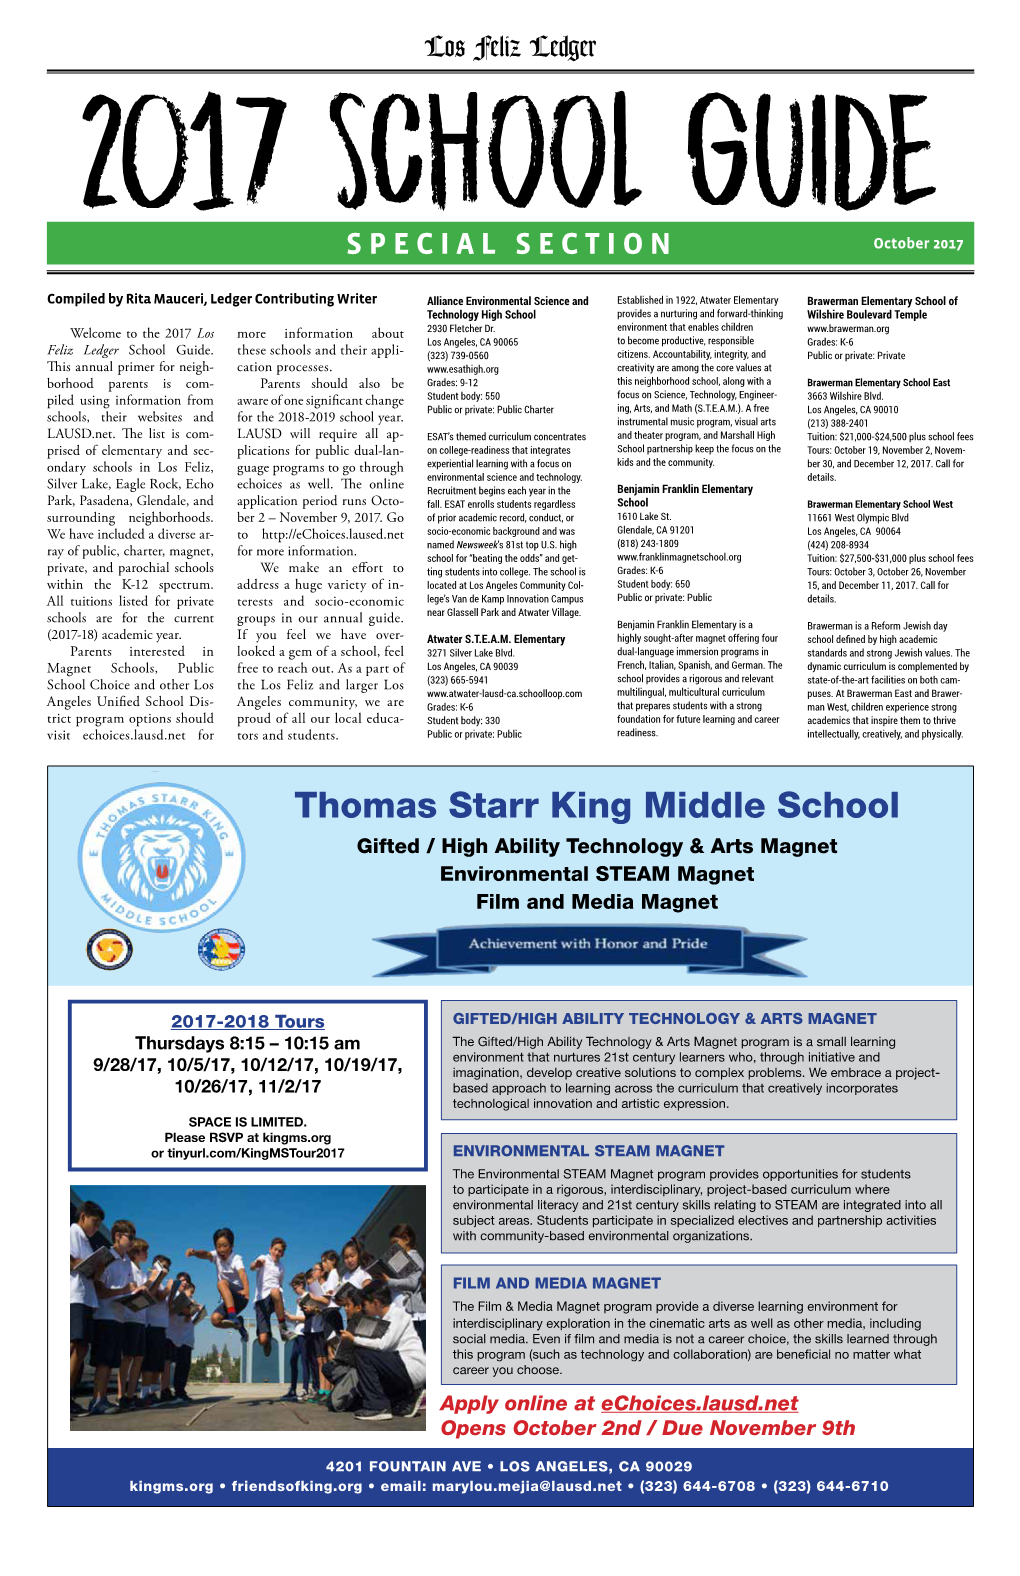 Thomas Starr King Middle School Gifted / High Ability Technology & Arts Magnet Environmental STEAM Magnet Film and Media Magnet